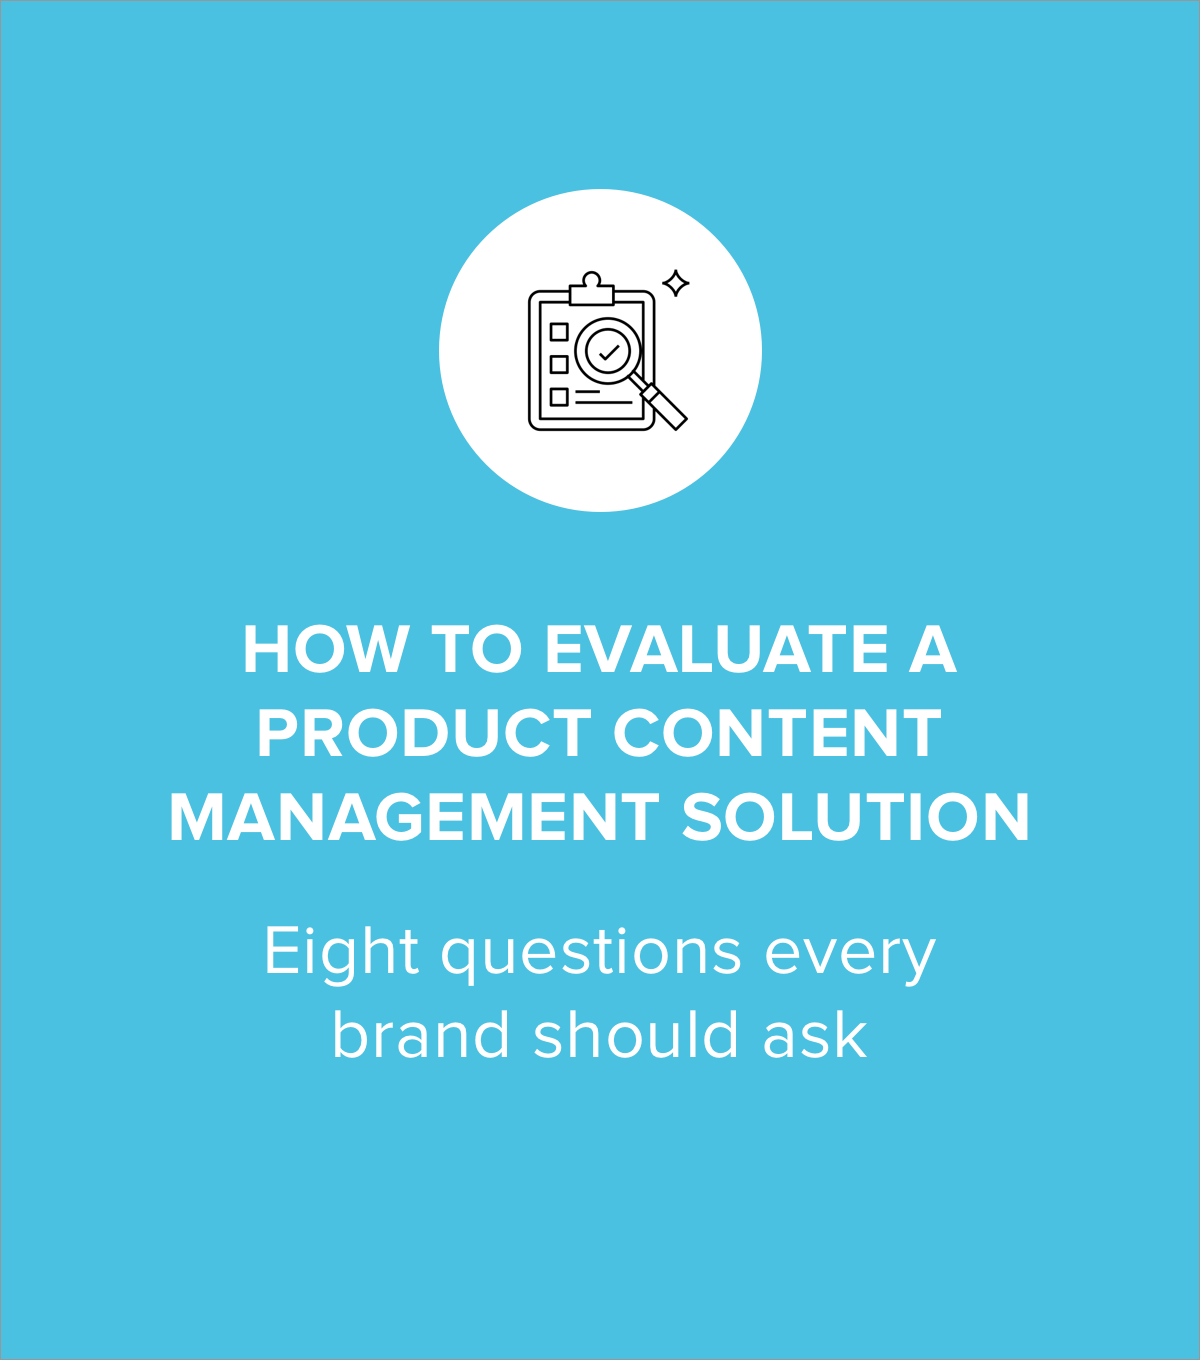 How to Evaluate a Product Content Management Solution